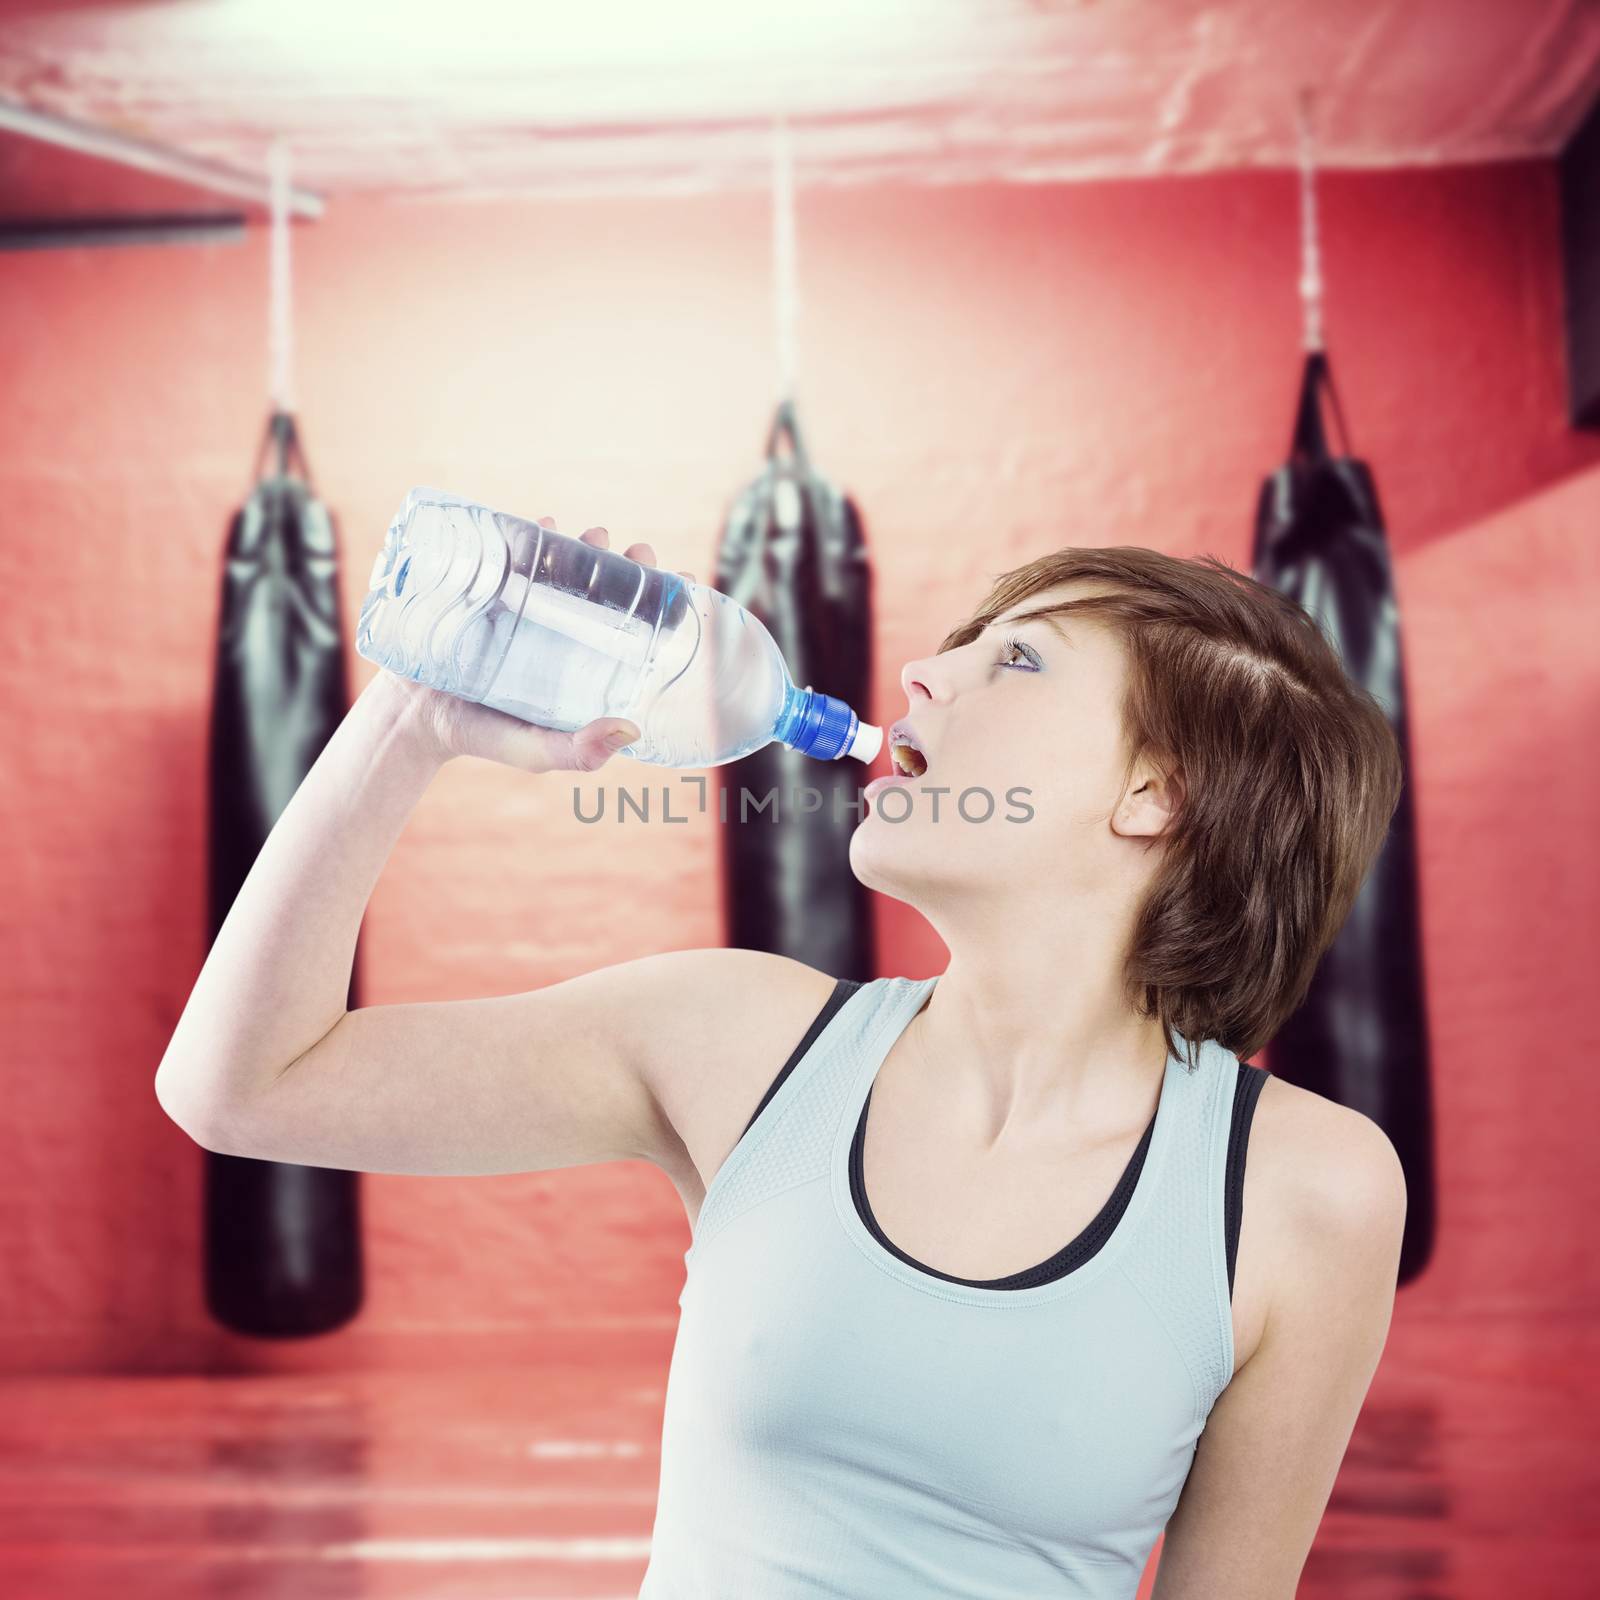 Pretty brunette drinking water against punching bags in red boxing area